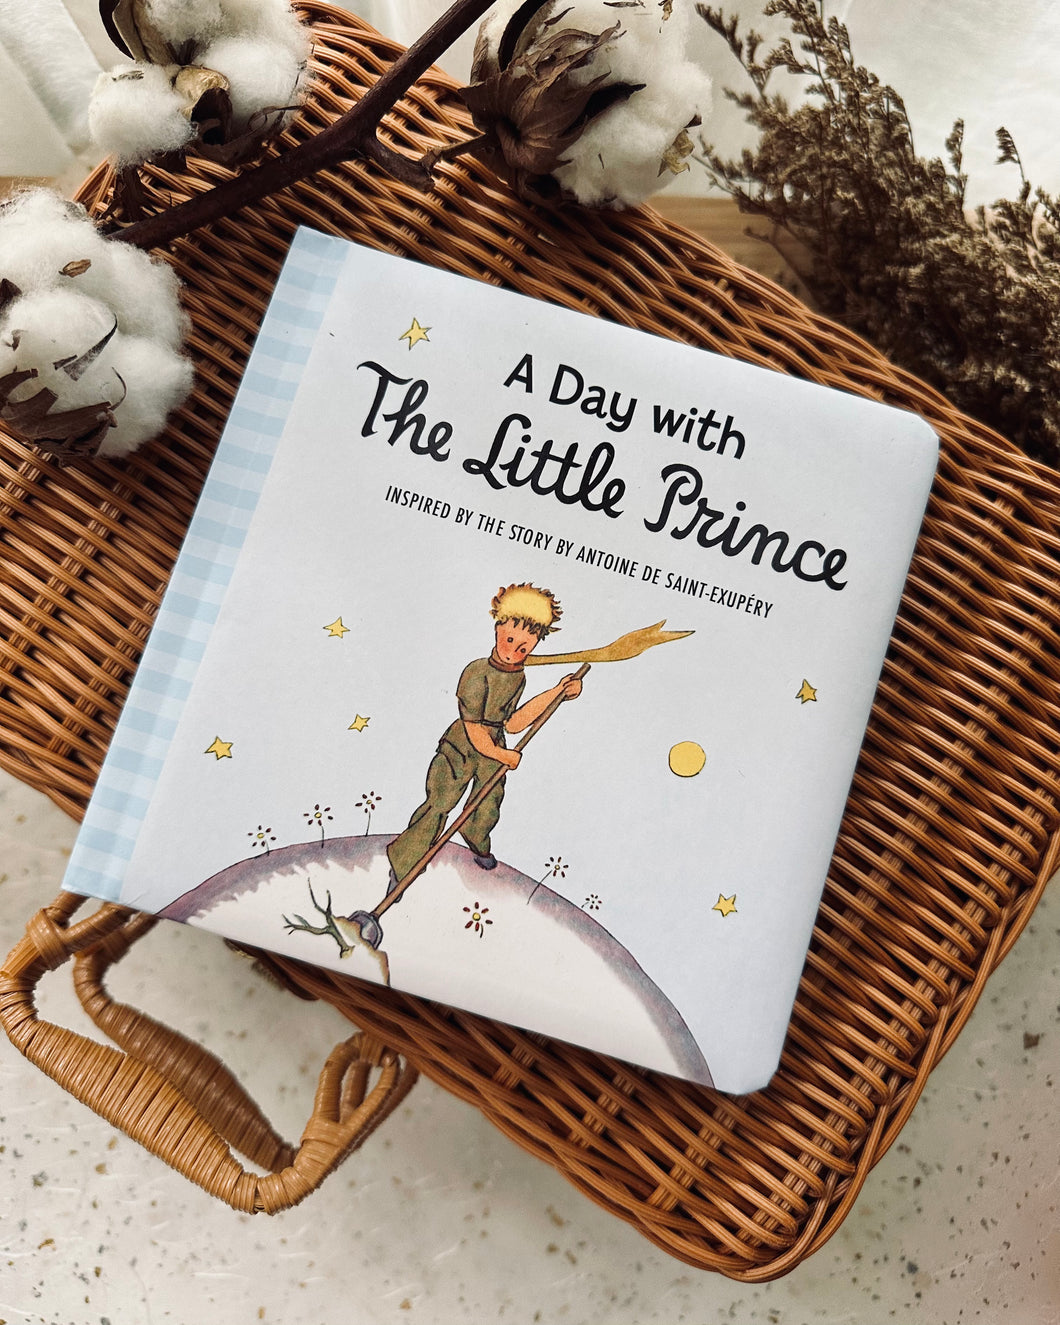 A Day with the Little Prince Padded Board Book